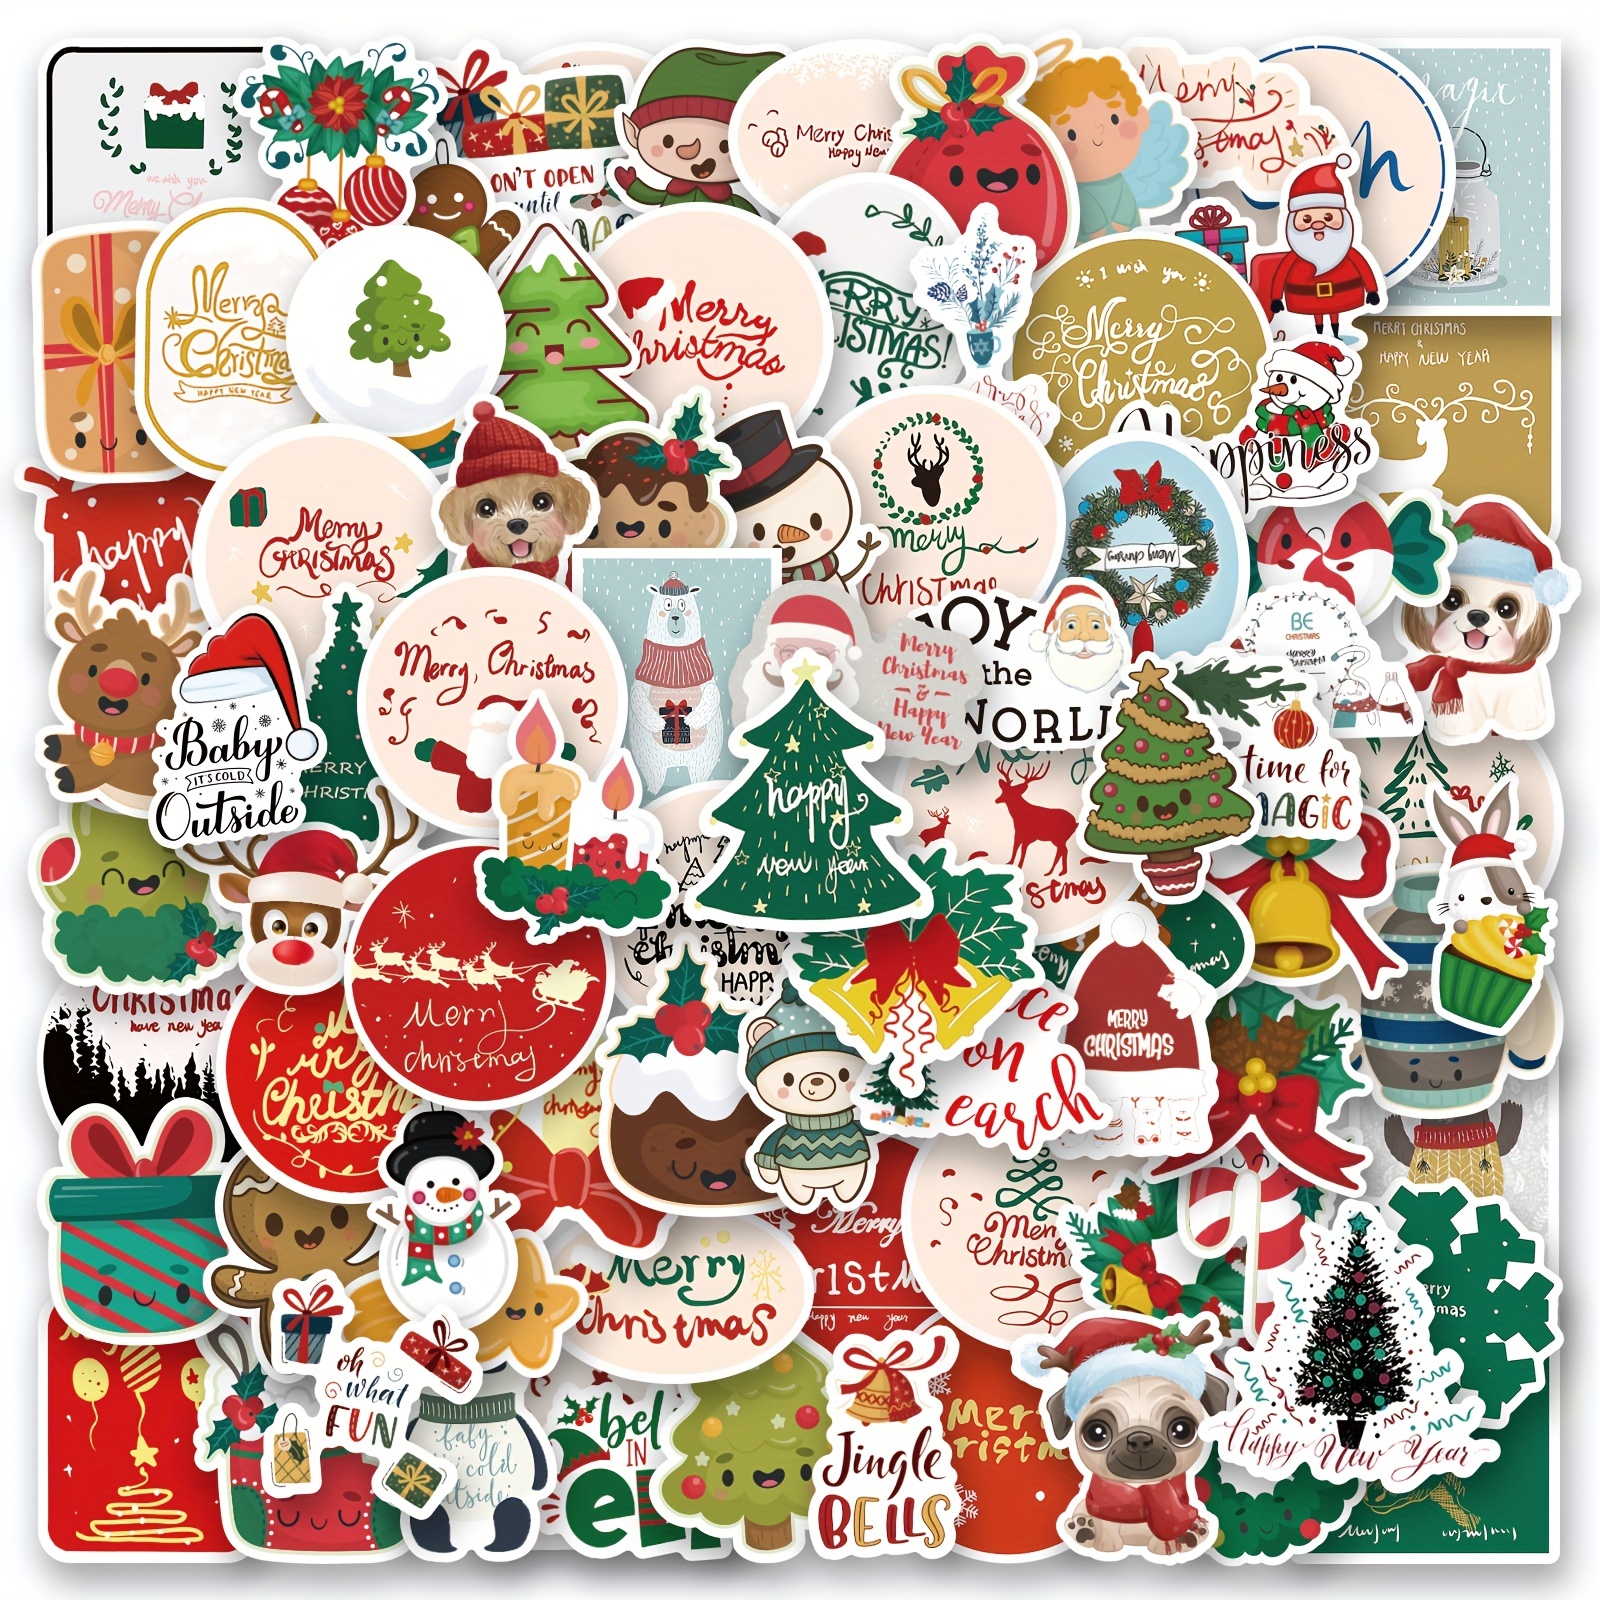 100-500pcs Merry Christmas Sticker Christmas Party Decoration Gift